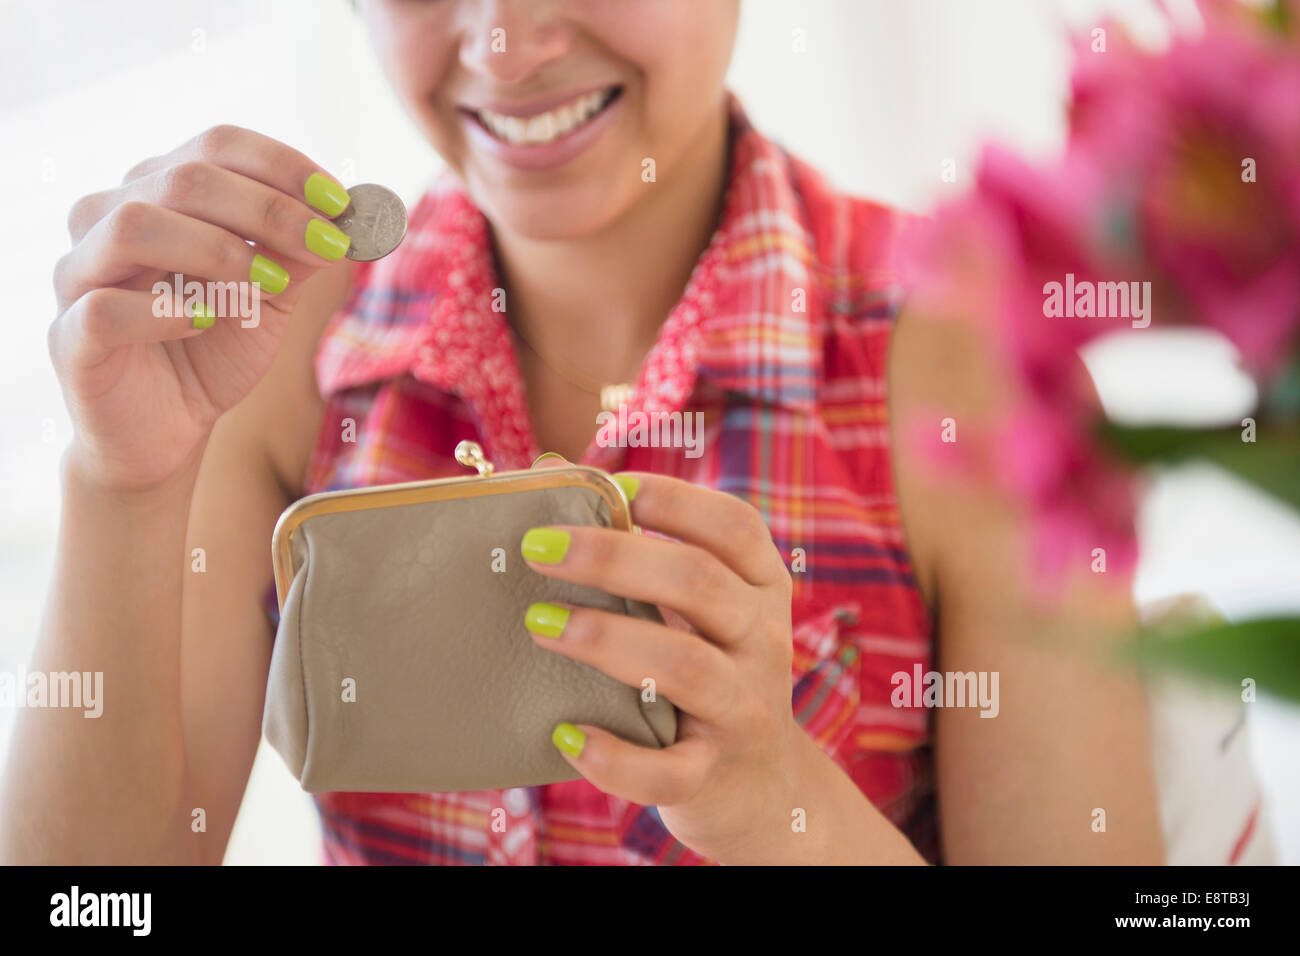 Mixed race woman putting coin into purse Stock Photo